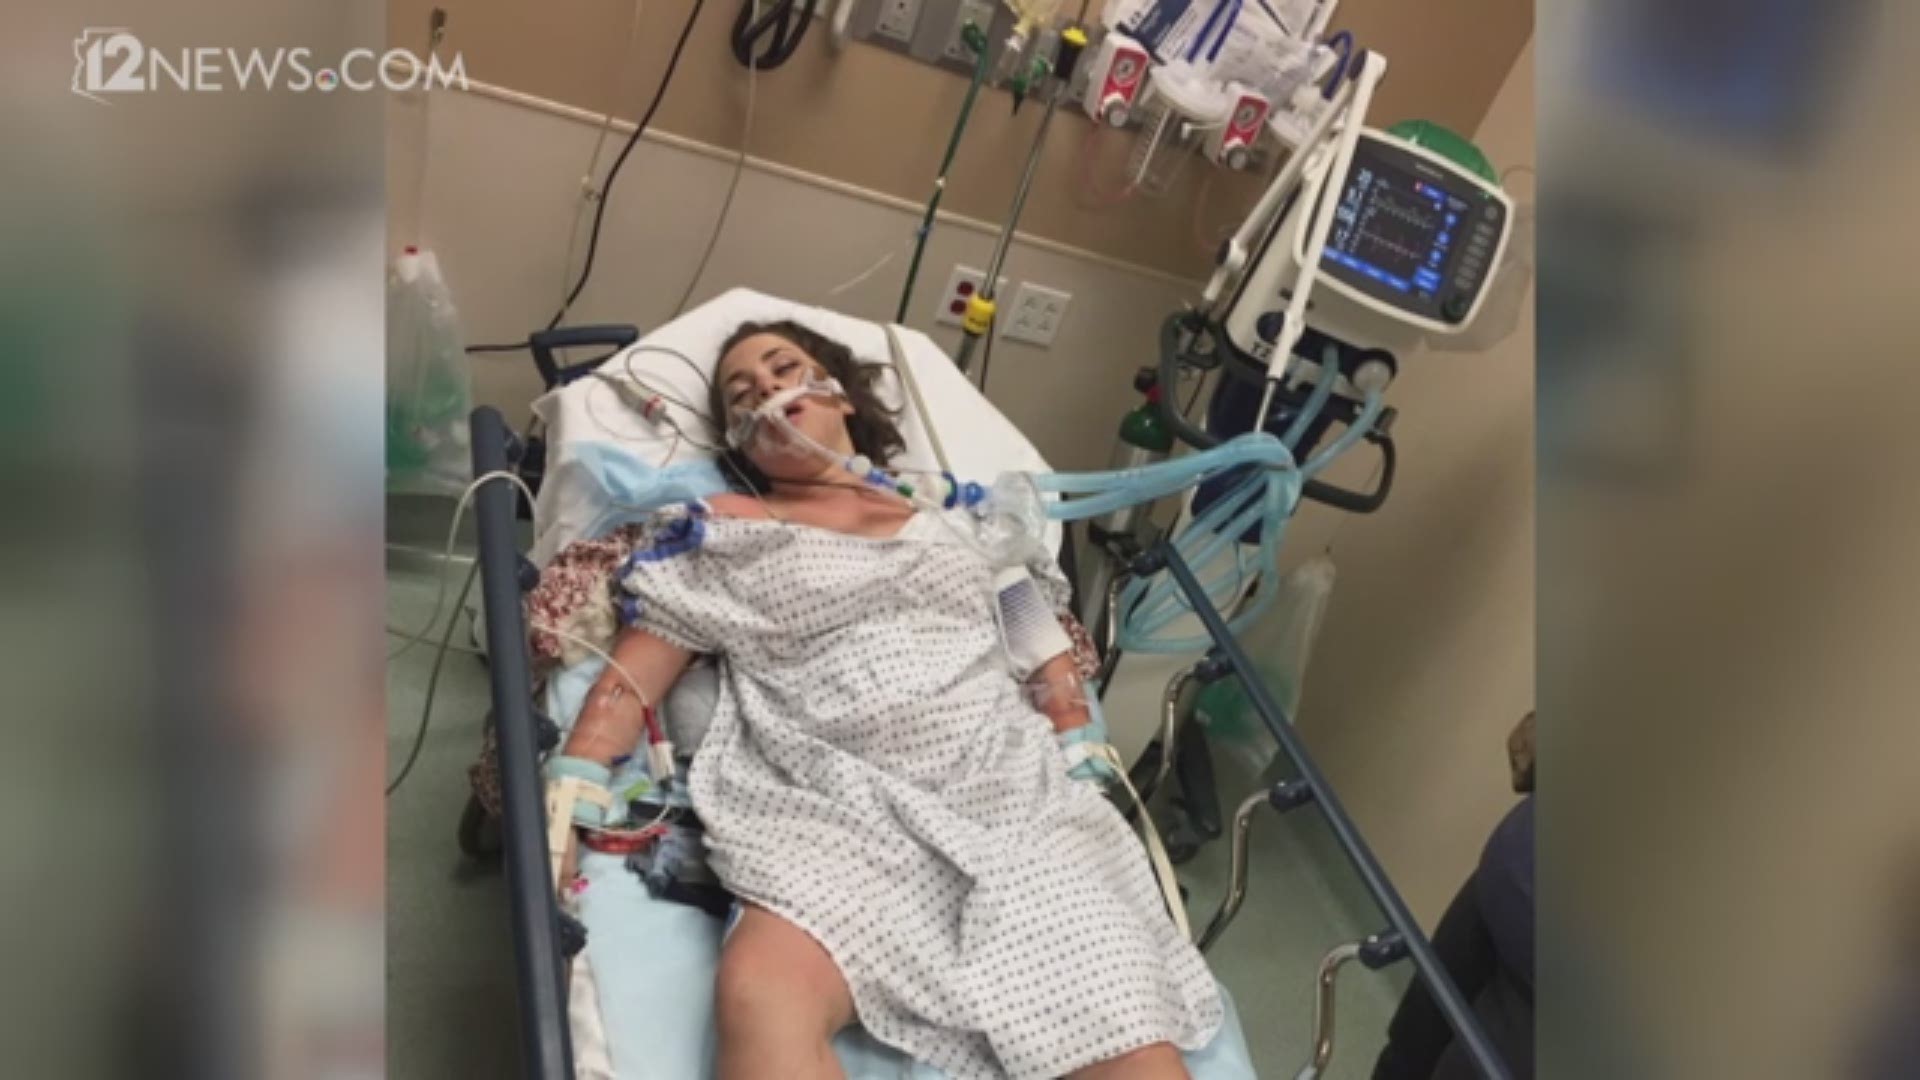 Young Woman Shares Chilling Hospital Photo After Alcohol Induced Coma 